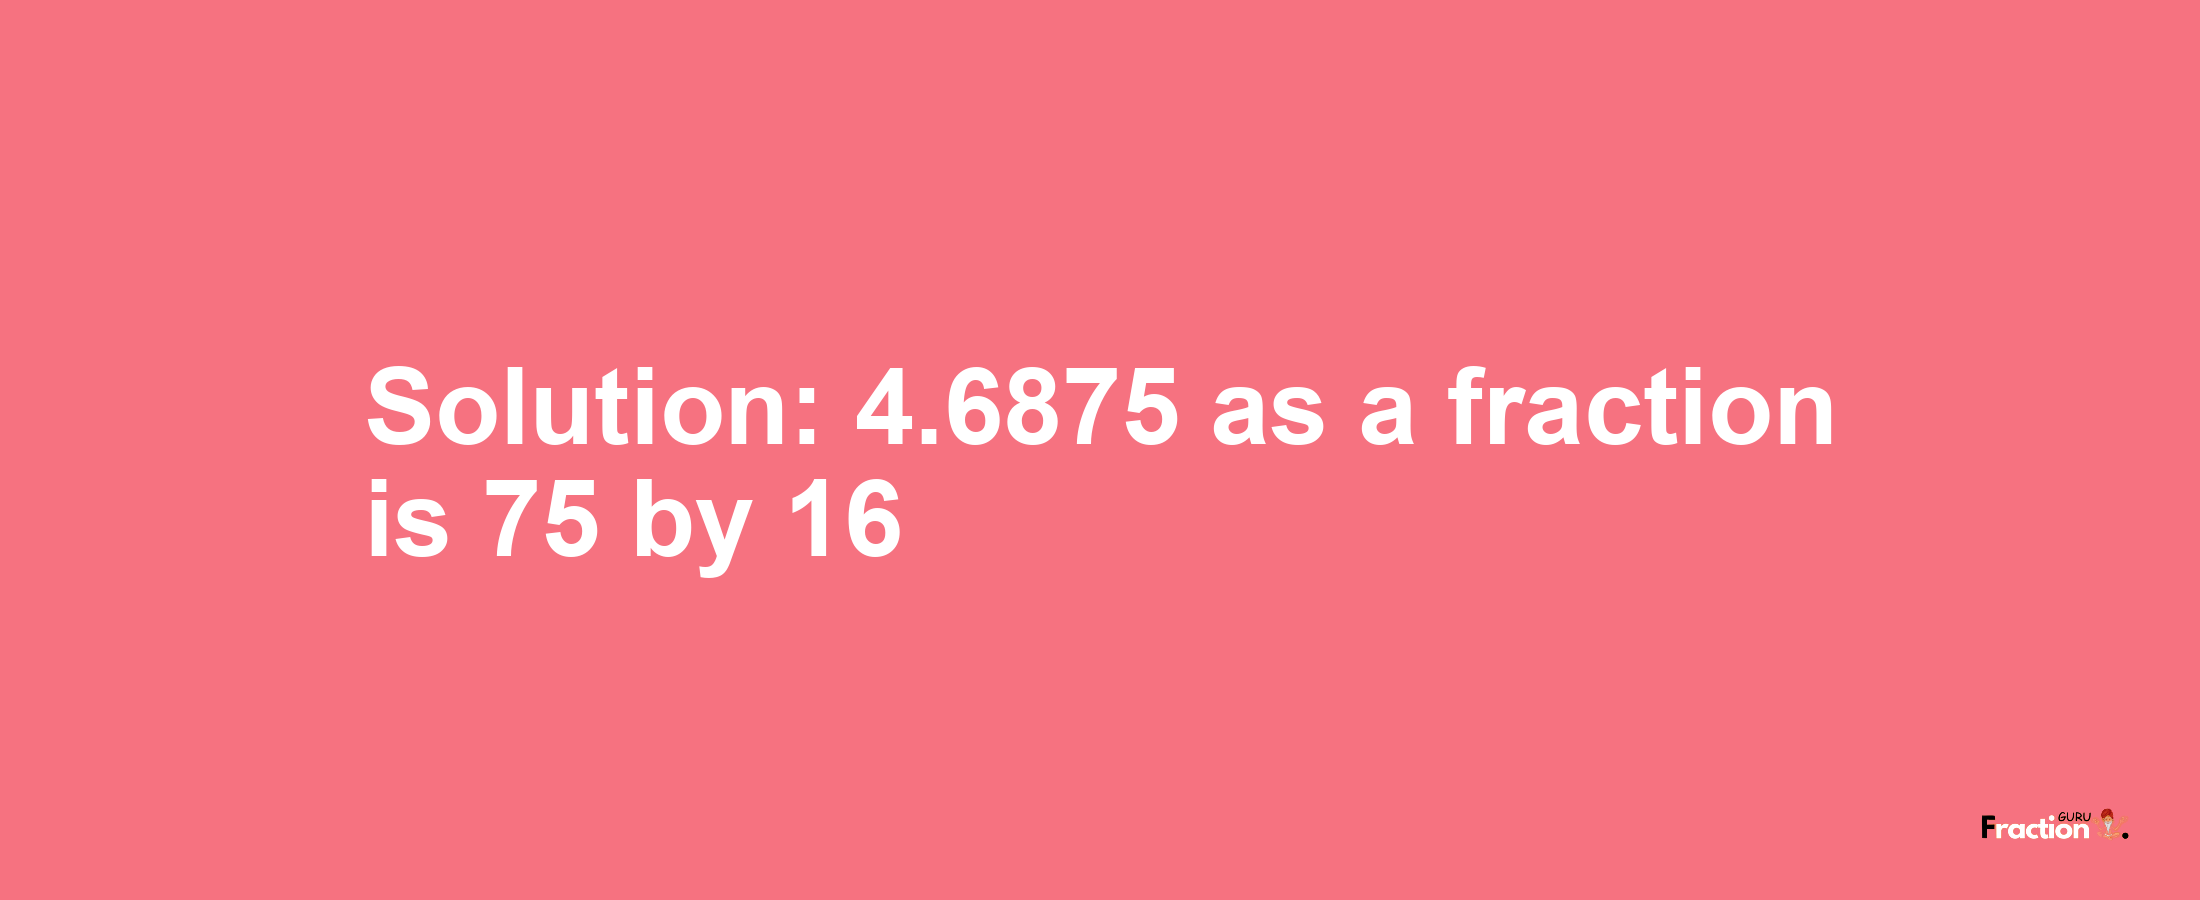 Solution:4.6875 as a fraction is 75/16